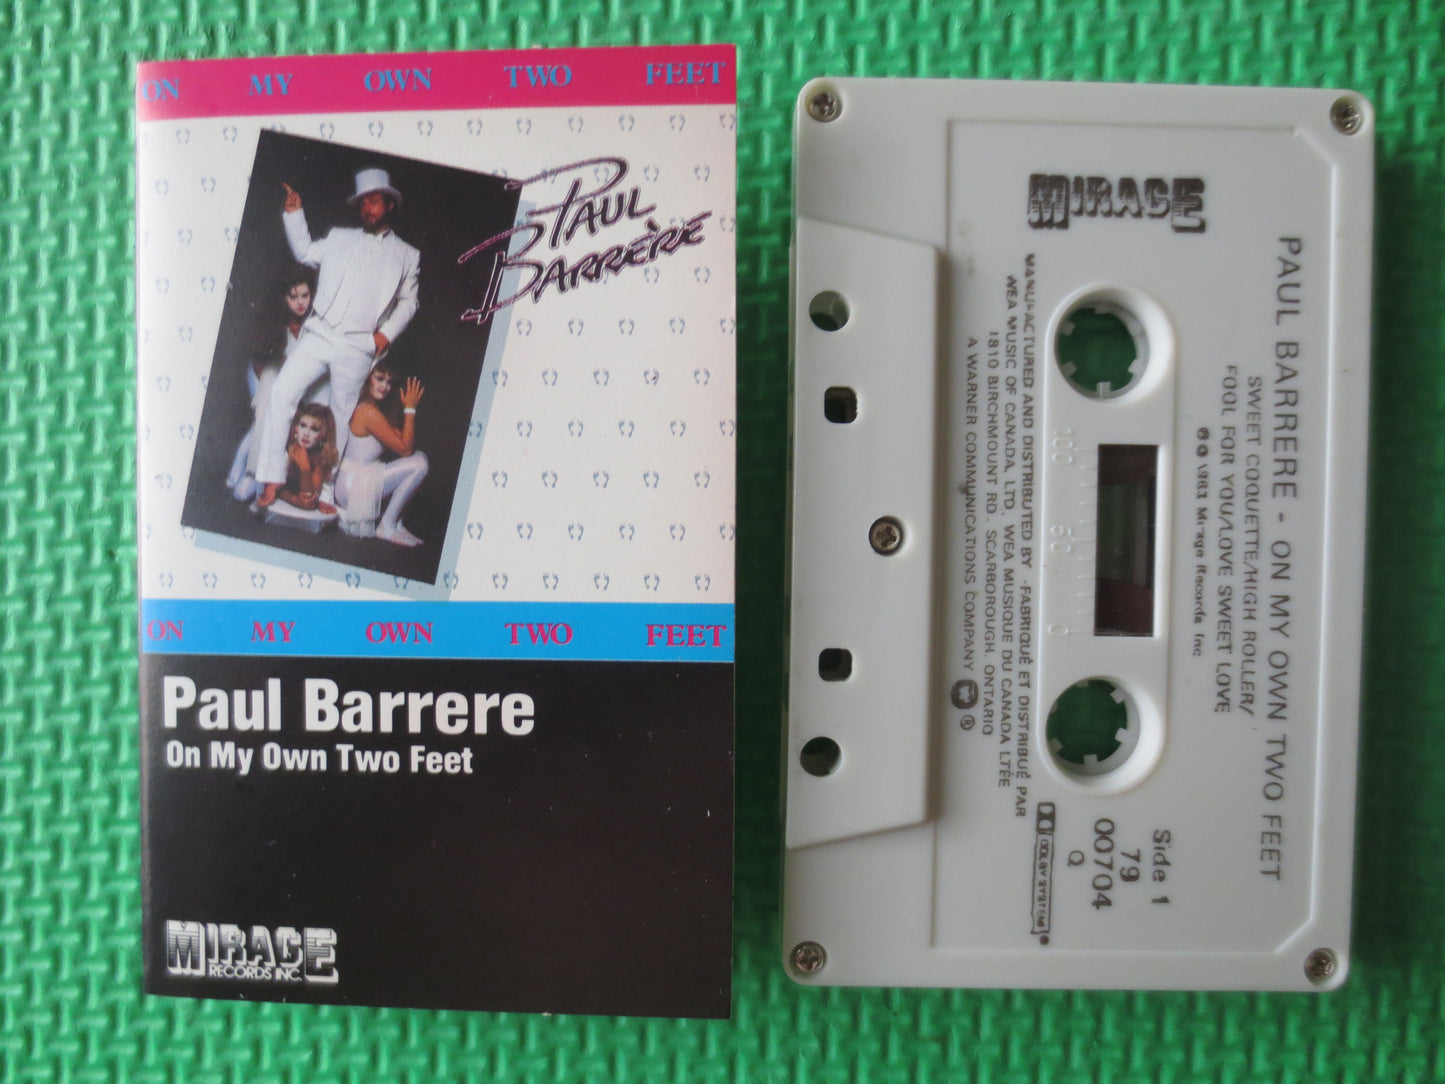 PAUL BARRERE, On My OWN Two Feet, Tapes, Tape Cassette, Rock Music Tapes, Music Cassettes, Cassette Music, 1983 Cassette